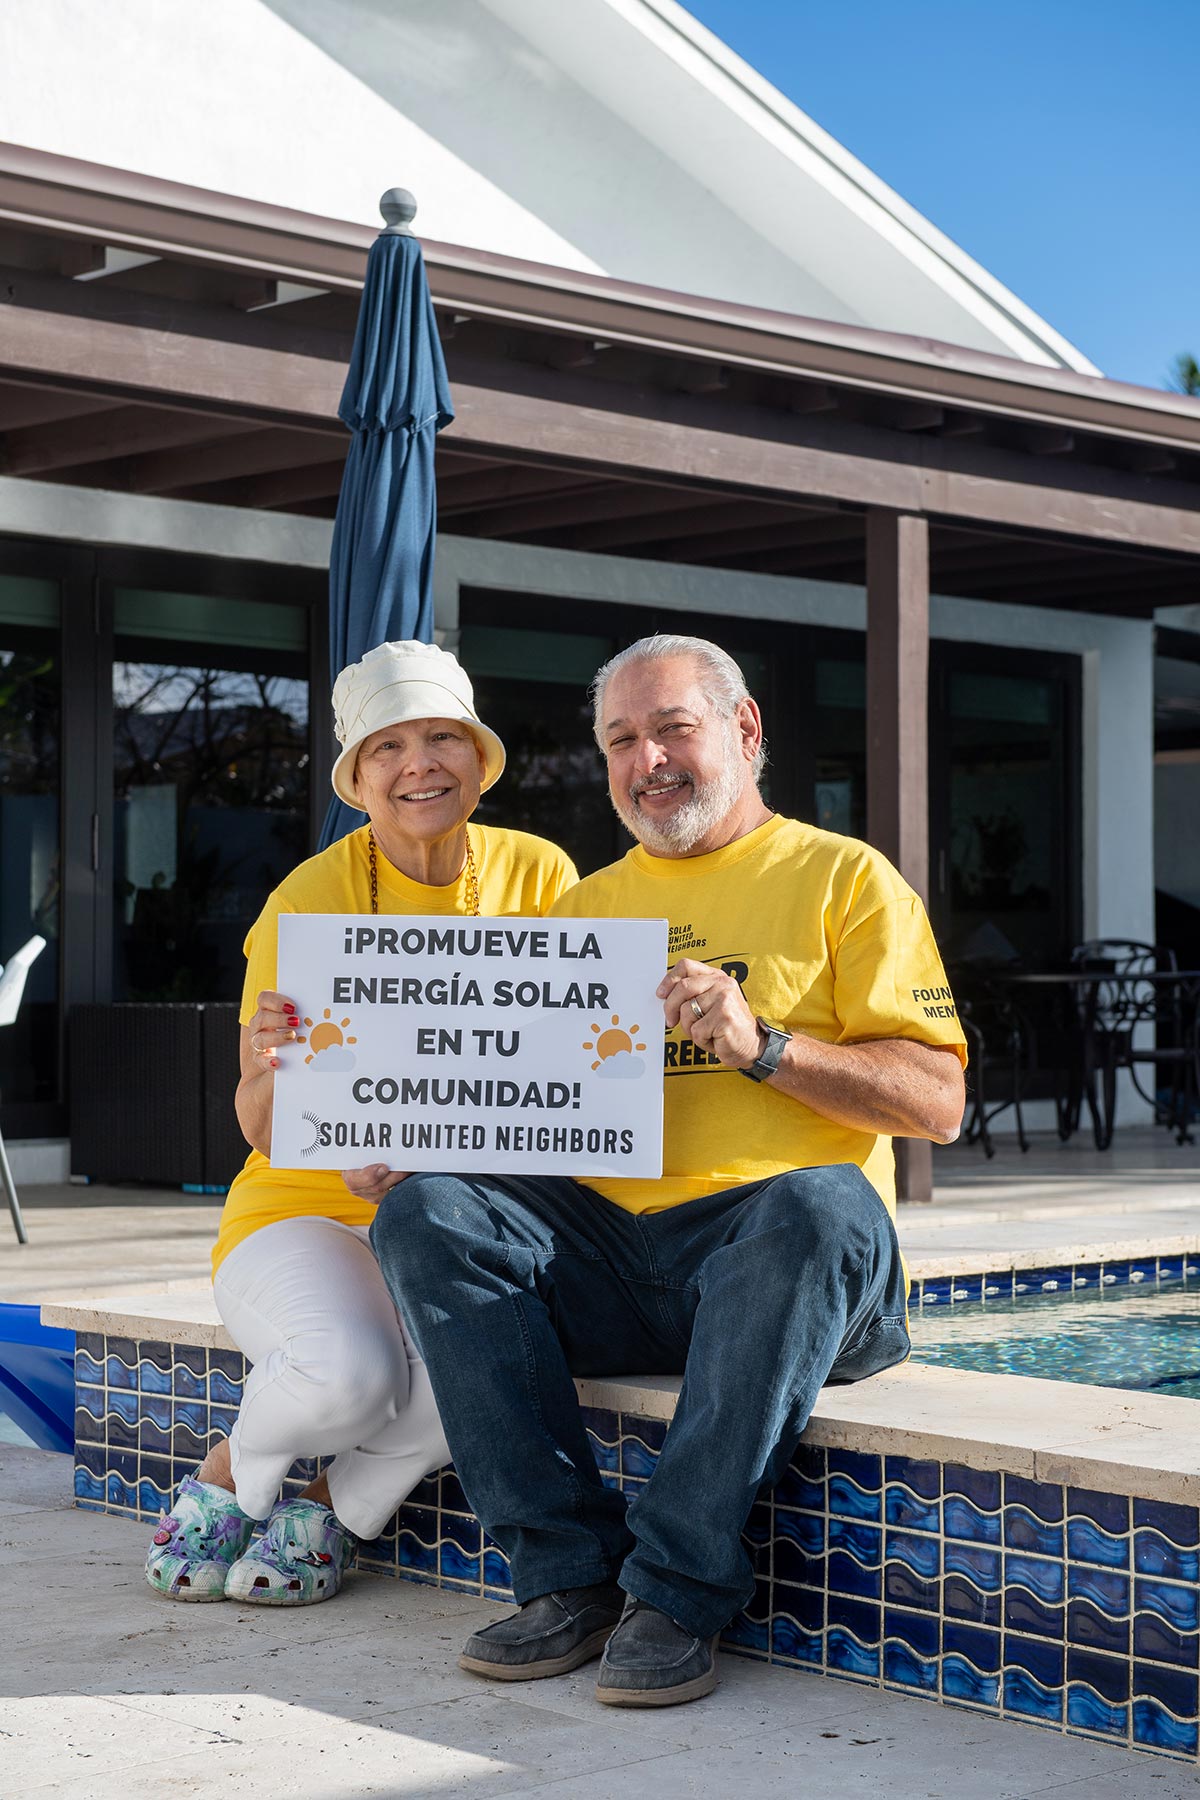 Vicky and Richard Delgado displaying their excitement for their new solar system in Hialeah, Florida Photo courtesy Sun United Neighbors